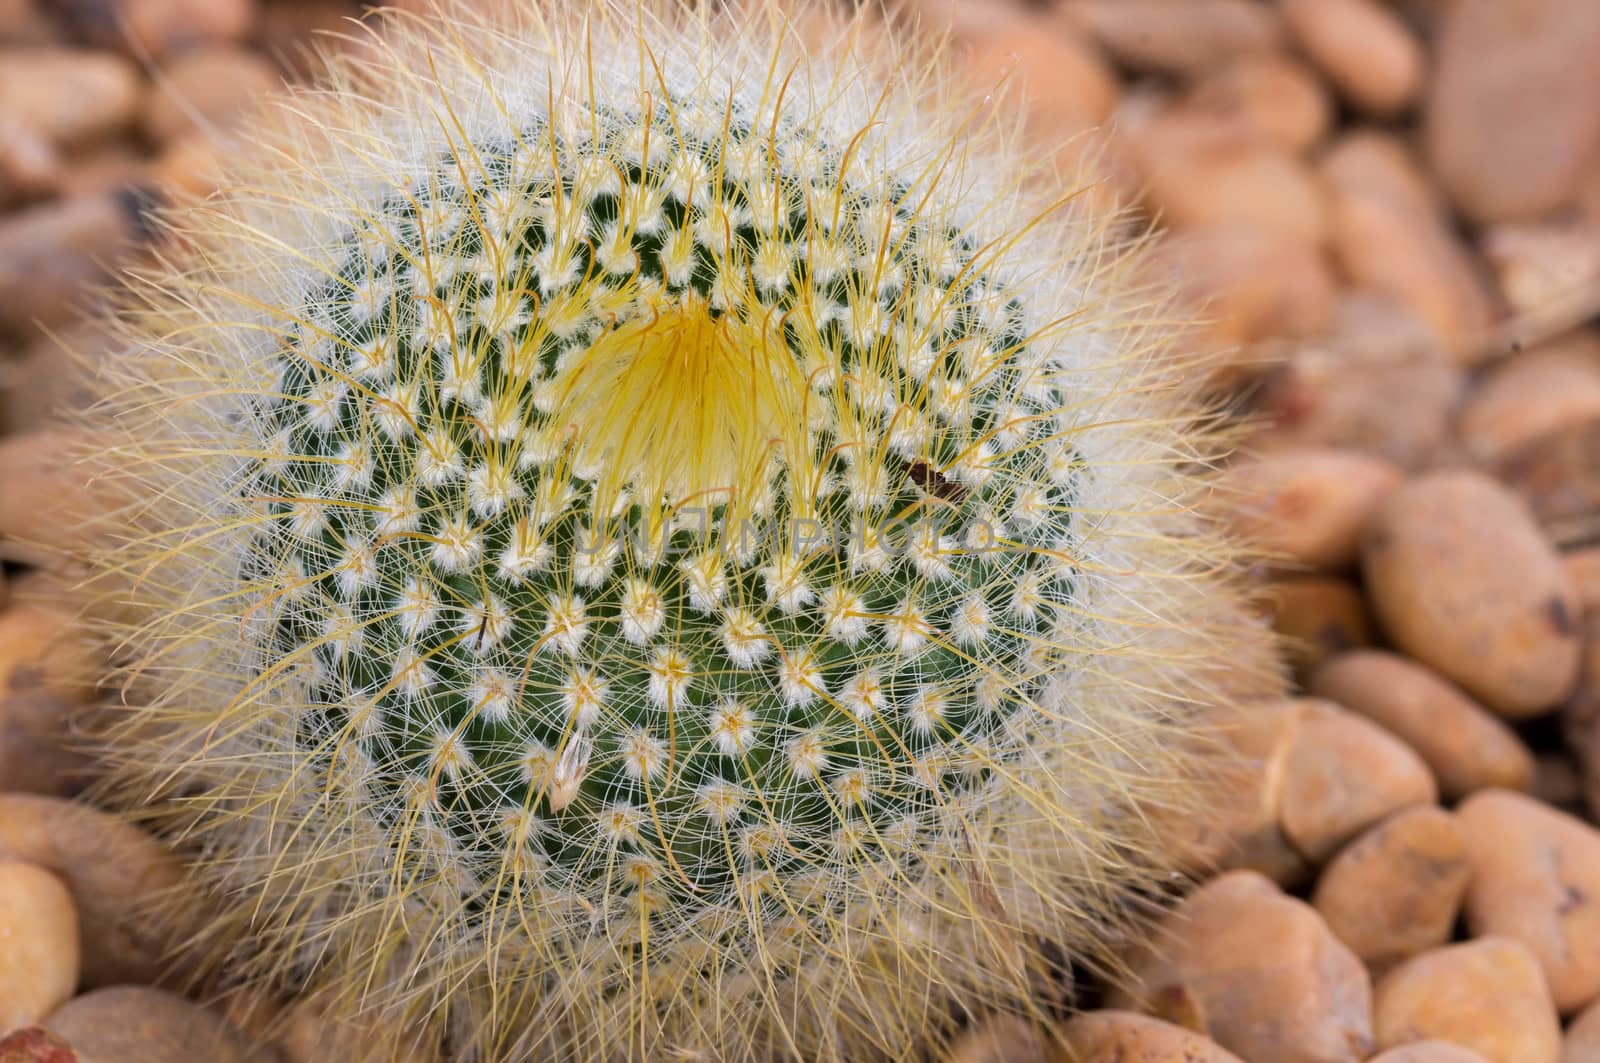 Close up view of several cactus.